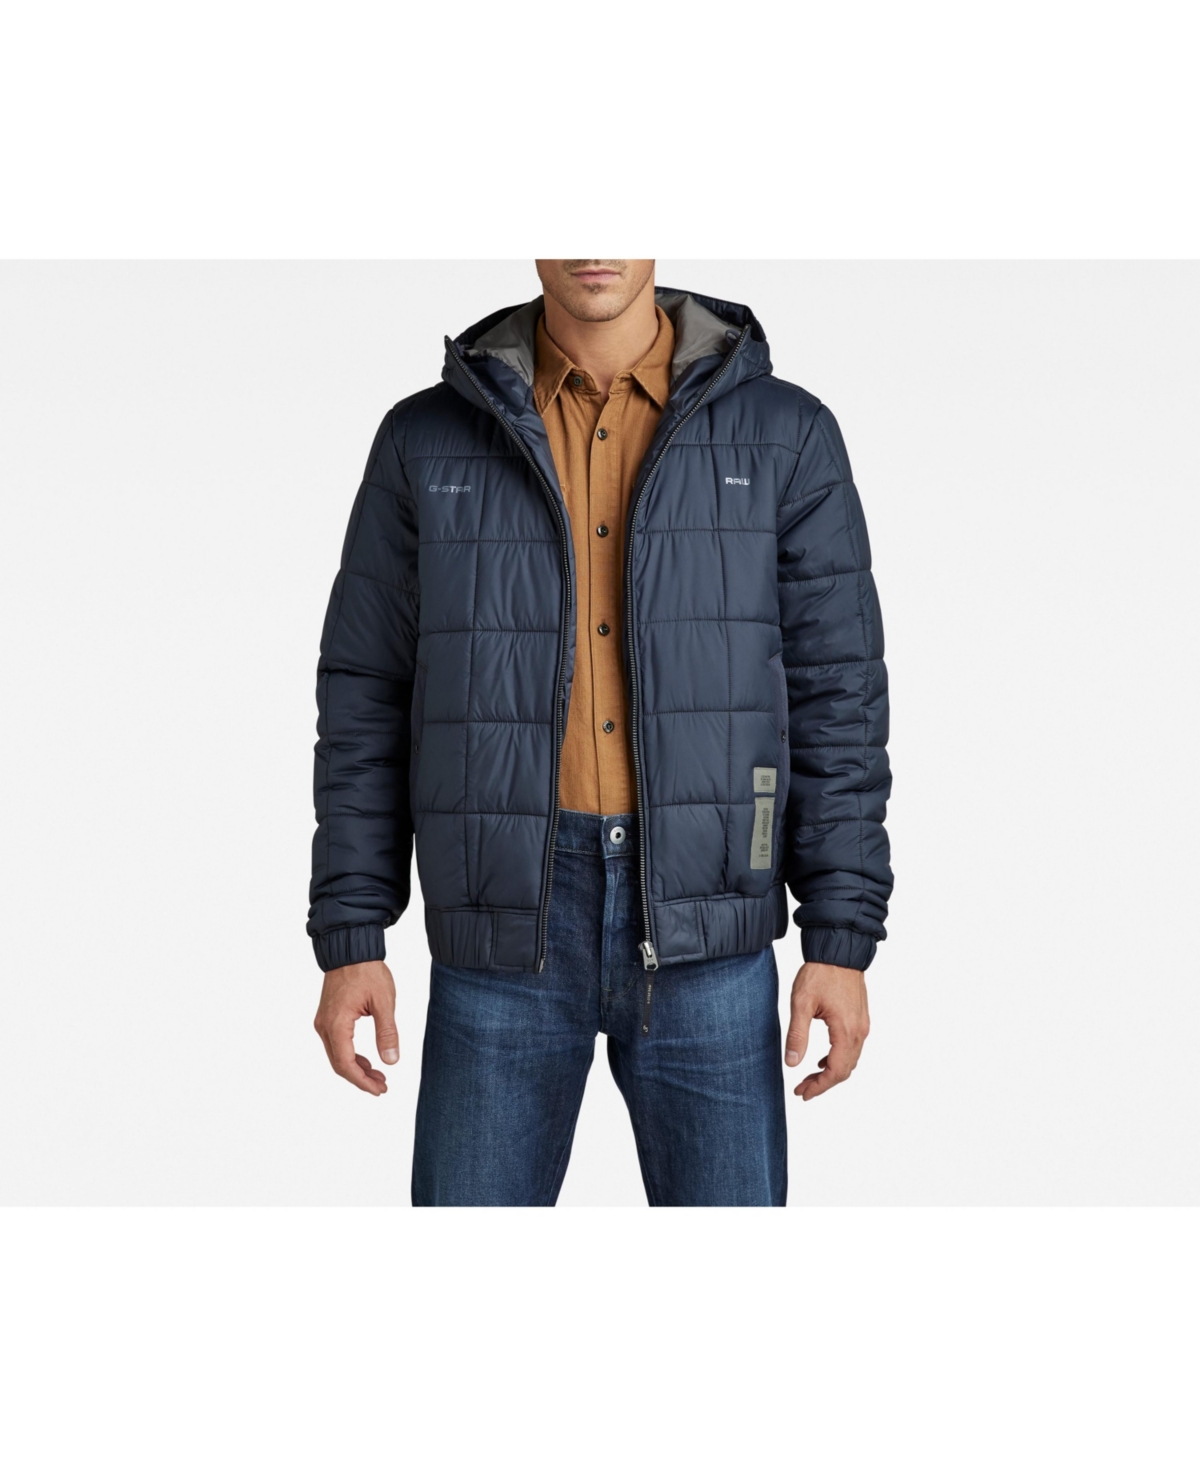 G-Star Raw Men's Meefic Square Quilted Jacket